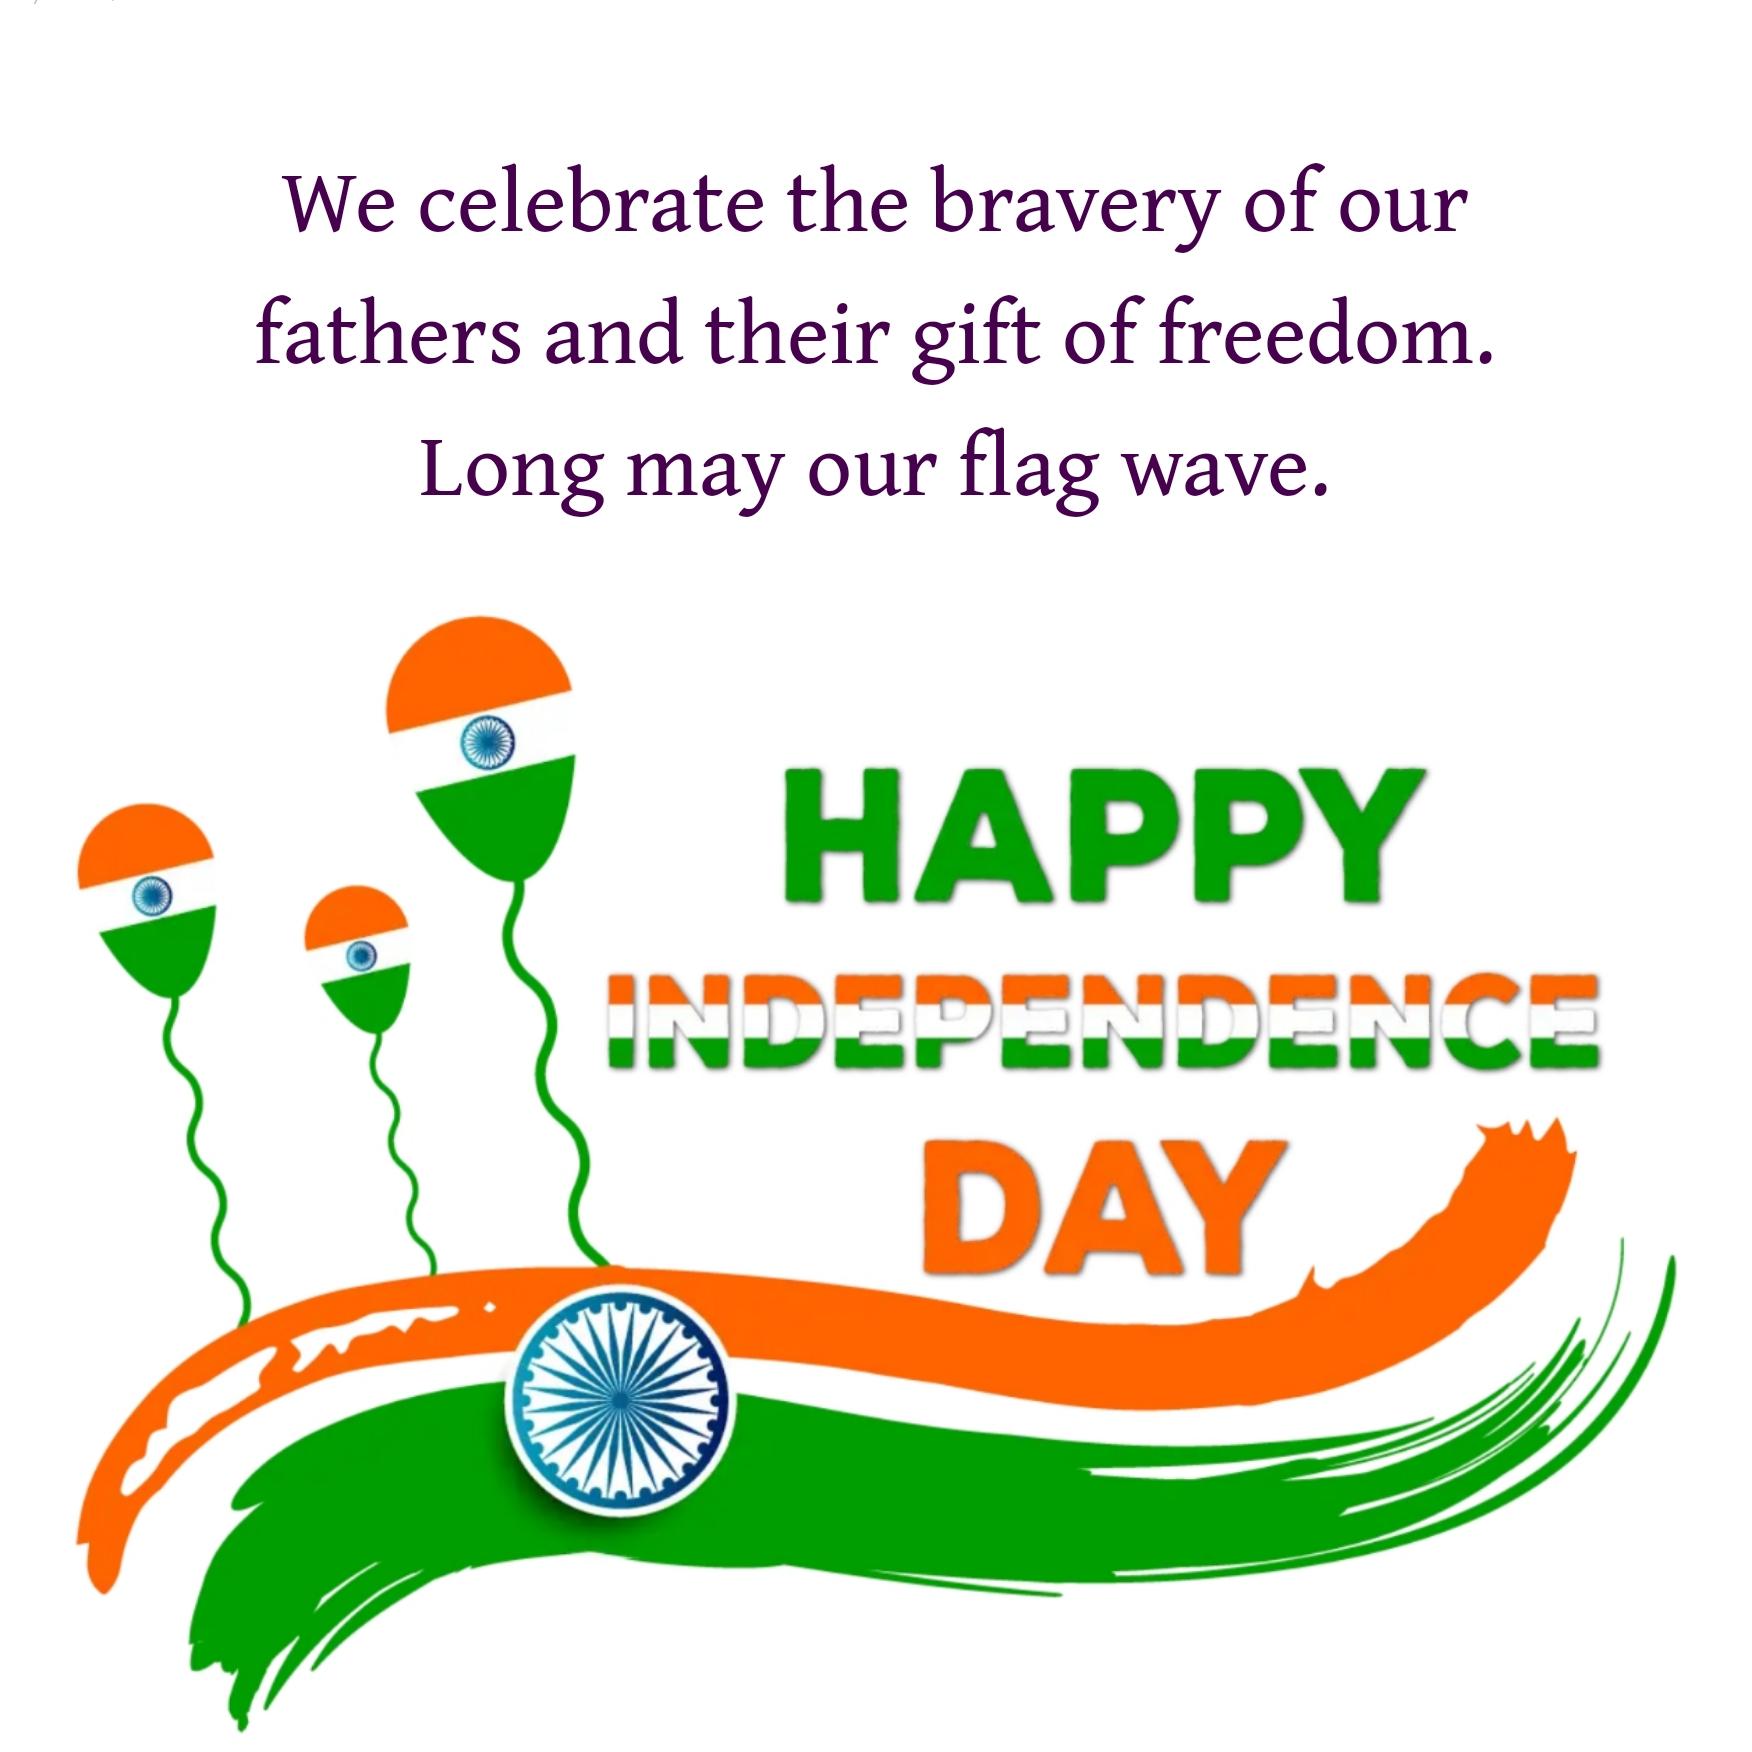 We celebrate the bravery of our fathers and their gift of freedom